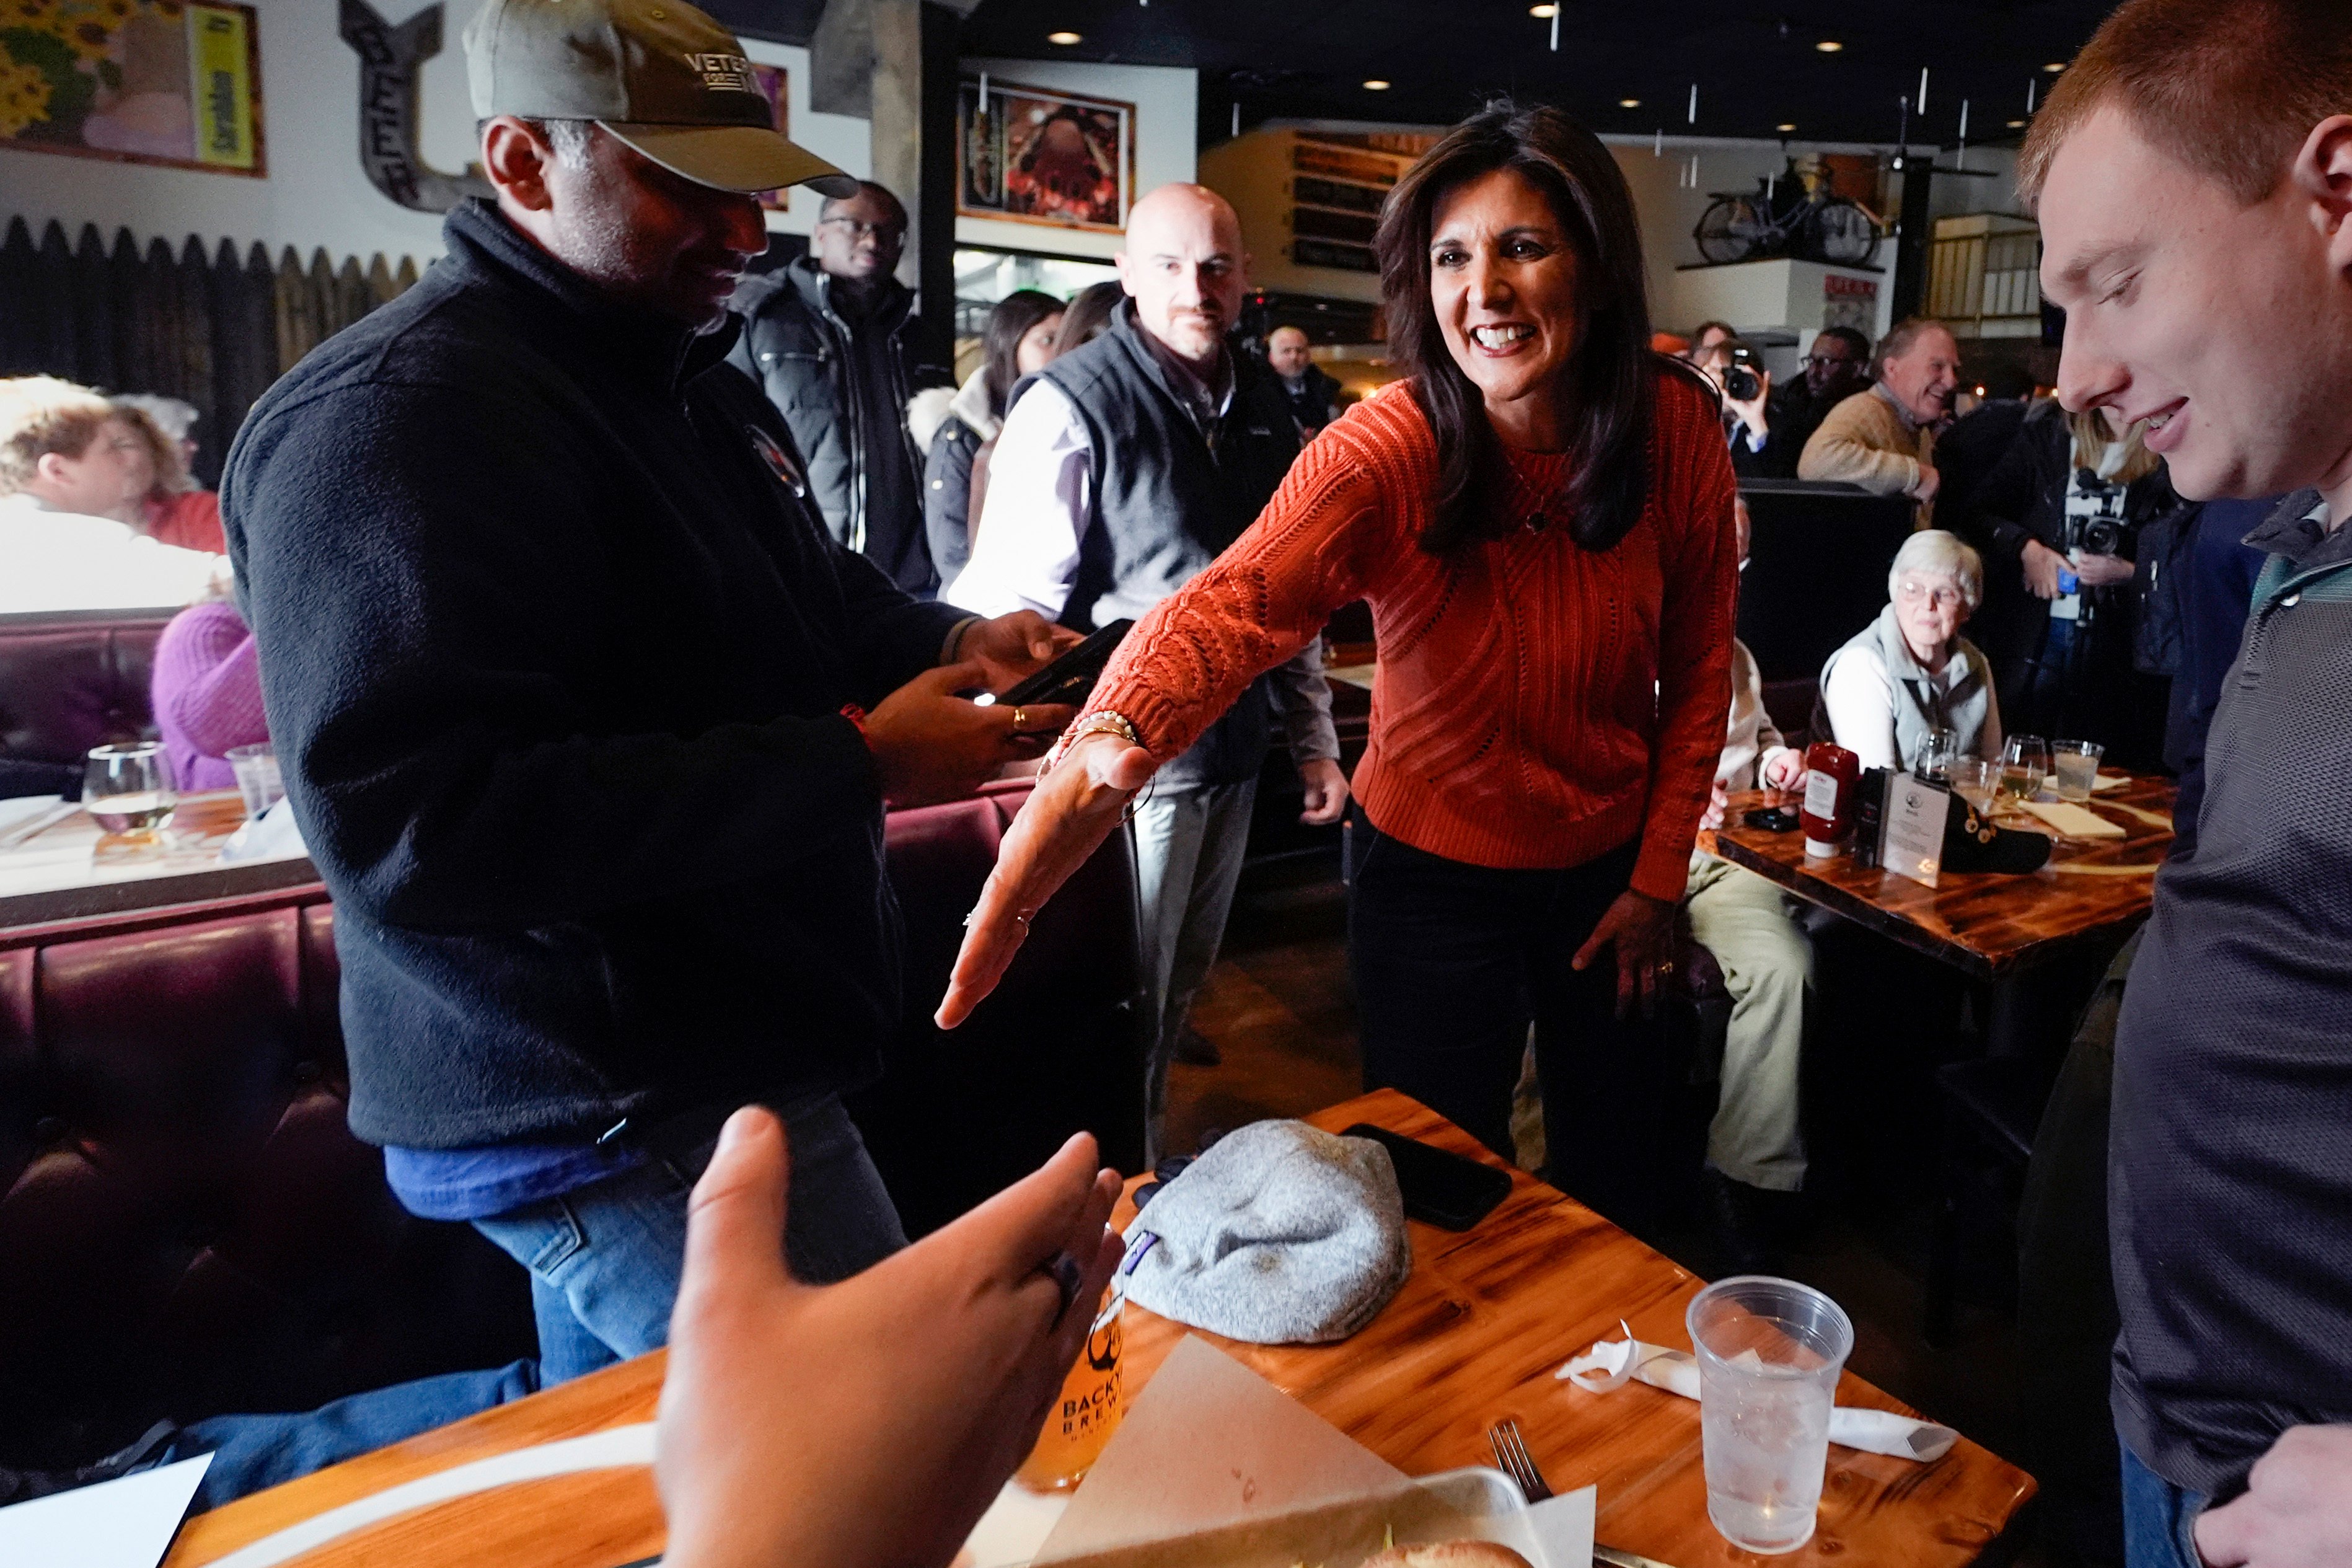 Nikki Haley shakes hands with a patron during a campaign stop at a brewery in Manchester, New Hampshire. Photo: AP